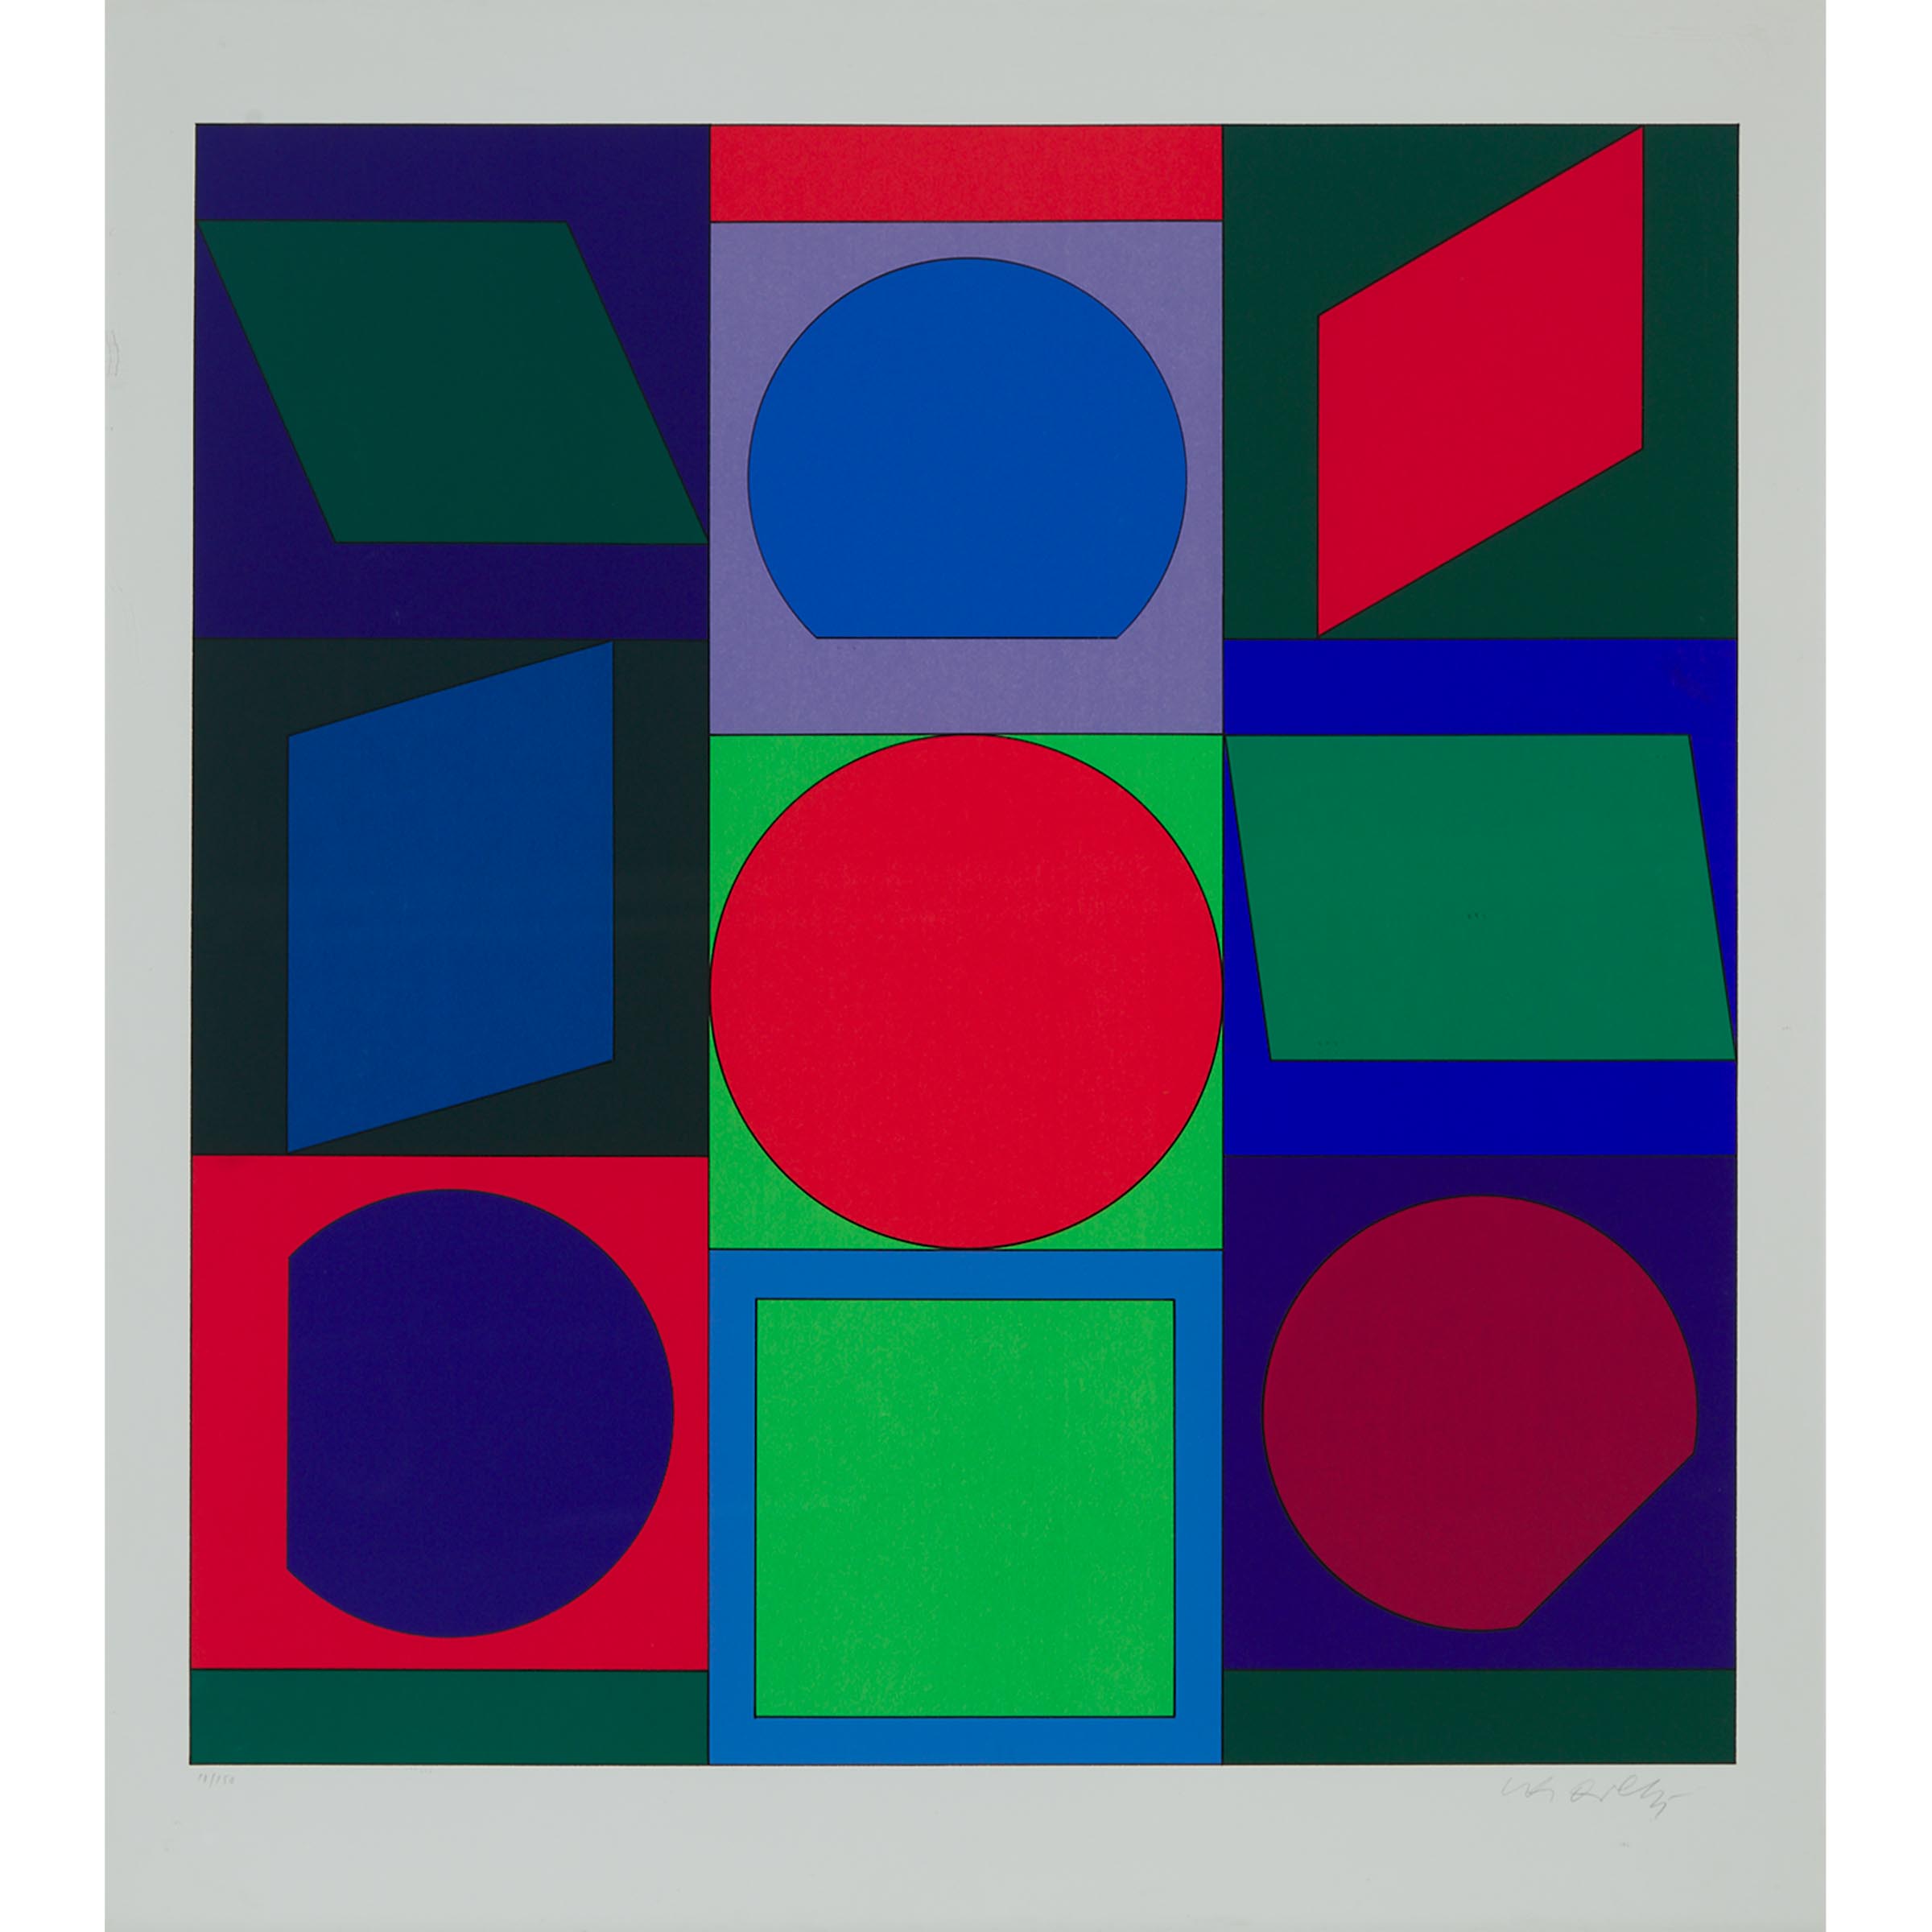 Victor Vasarely (1906-1997), Hungarian/French